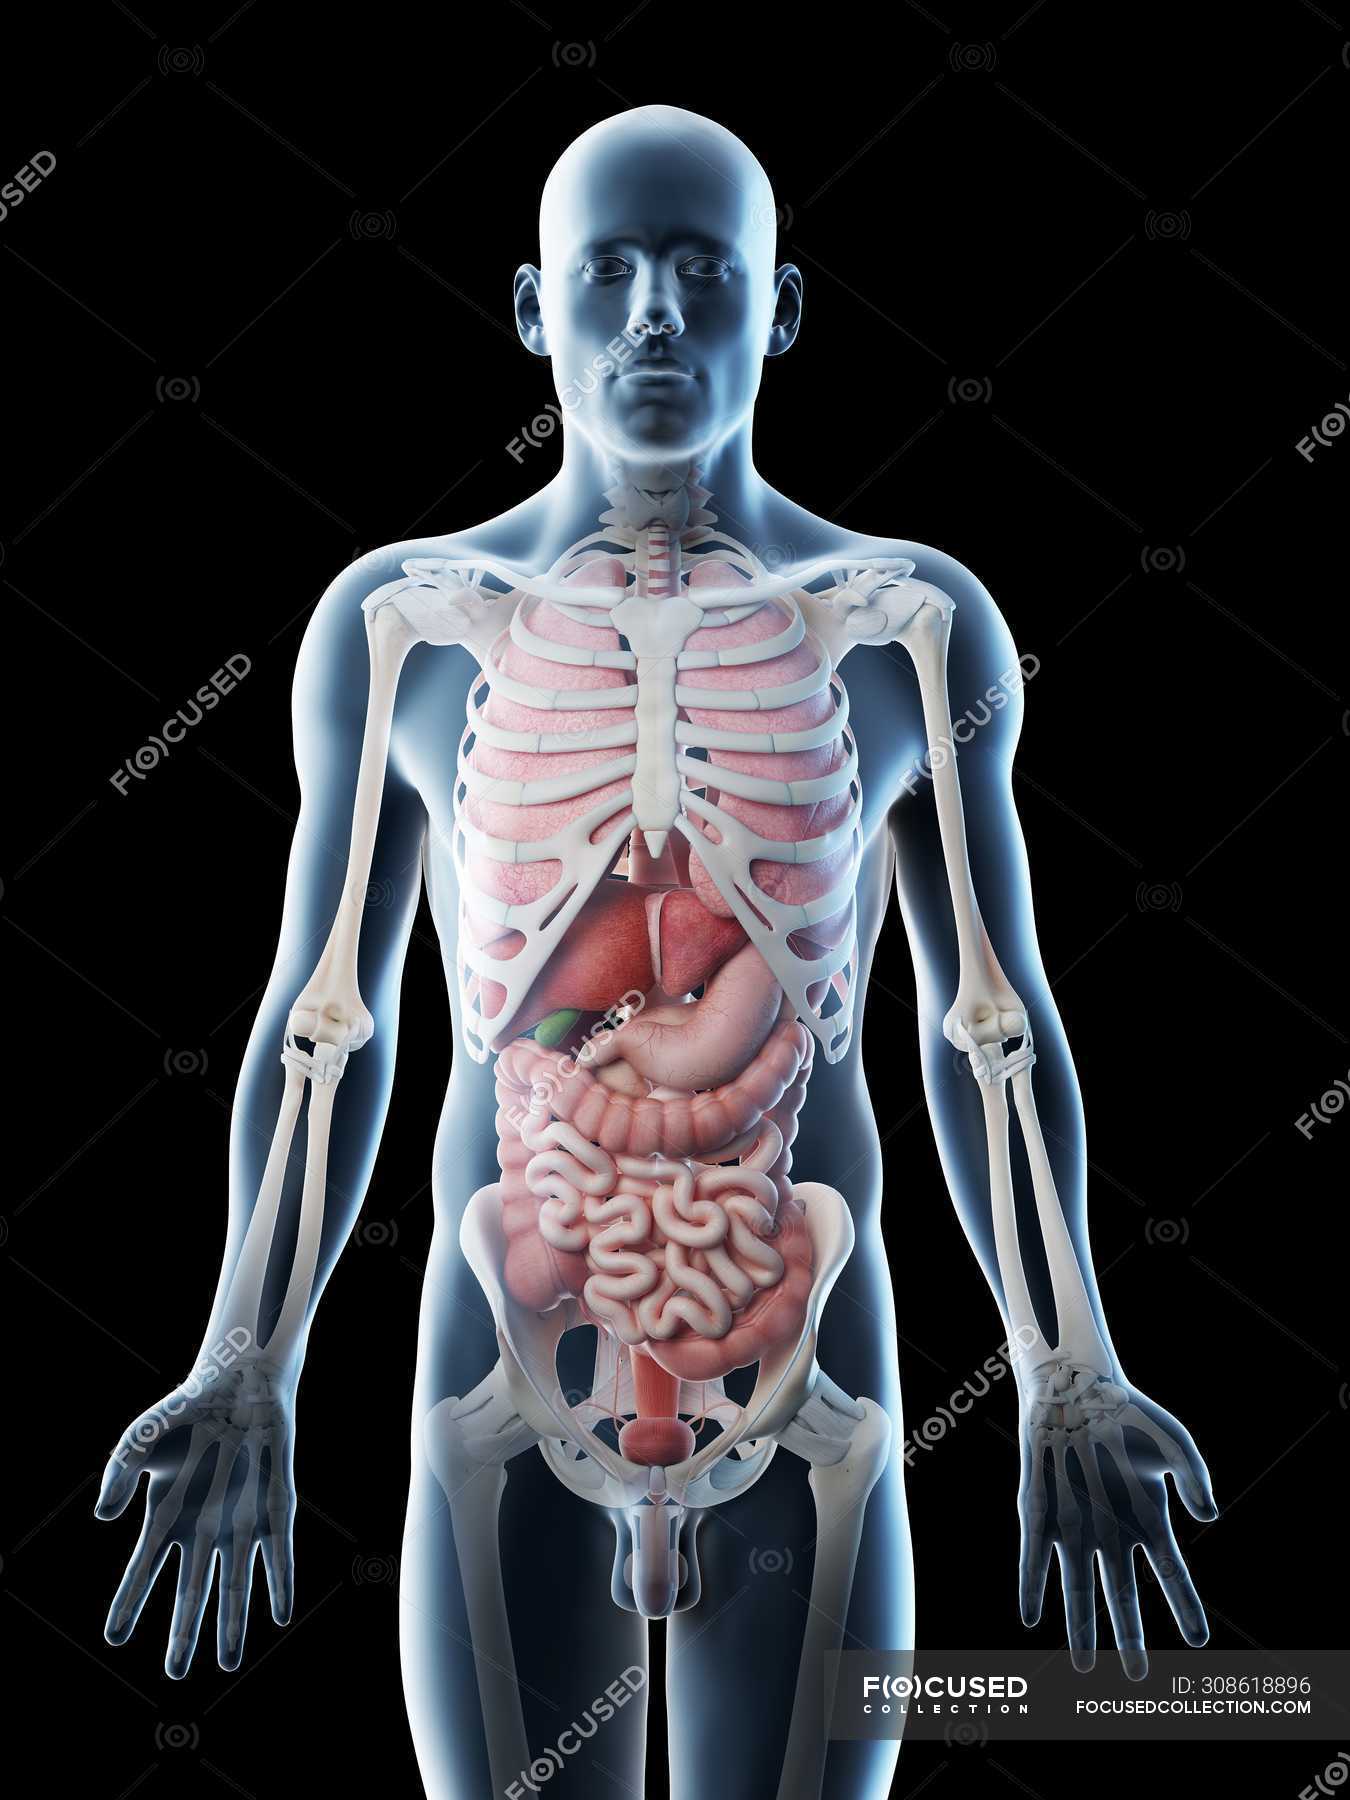 Transparent body model showing male anatomy and internal organs